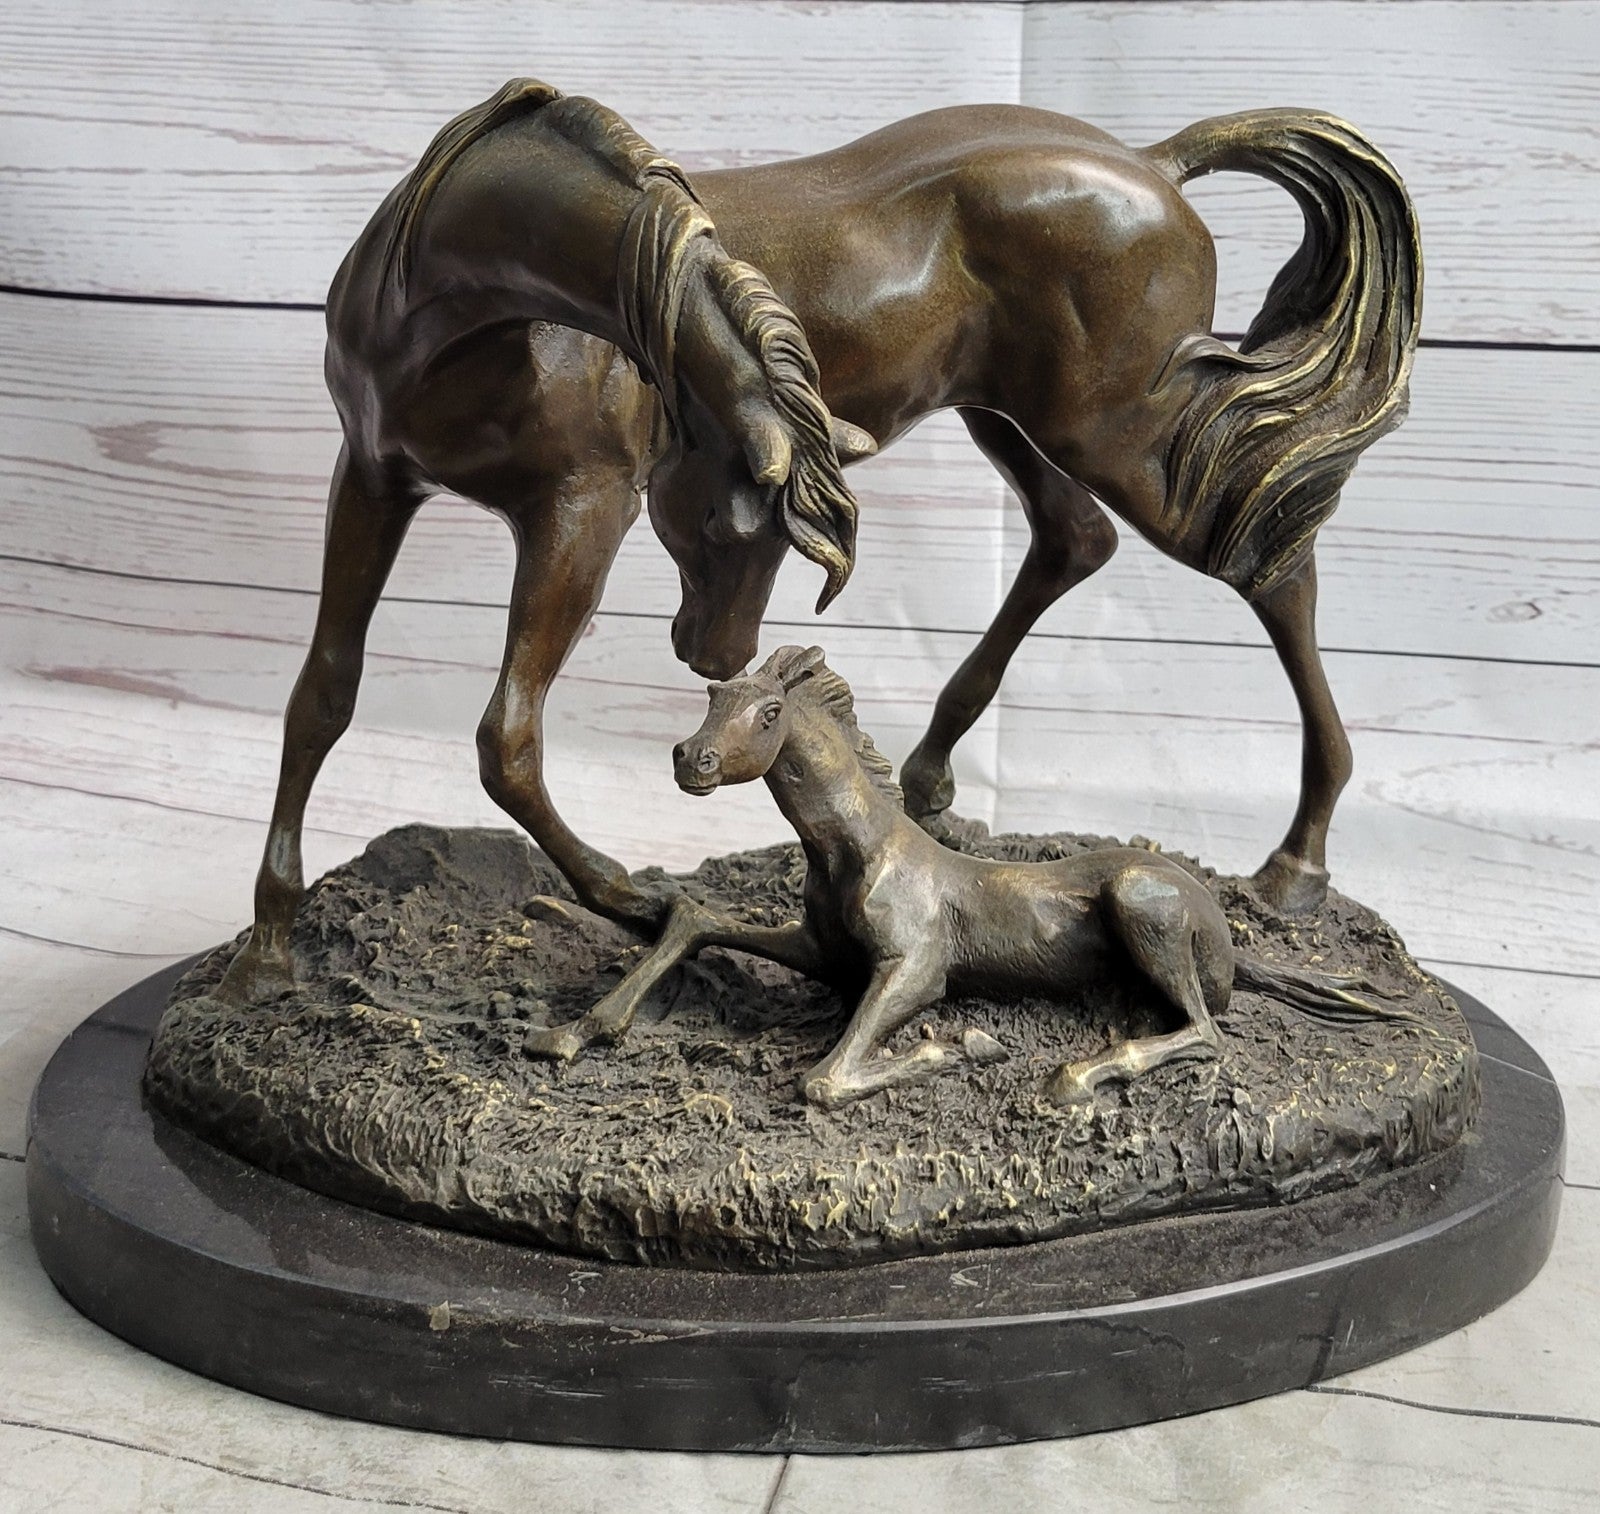 Very Heavy Bronze " Mare With Rearing Colt" By.French sculptor Bugatti Sculpture